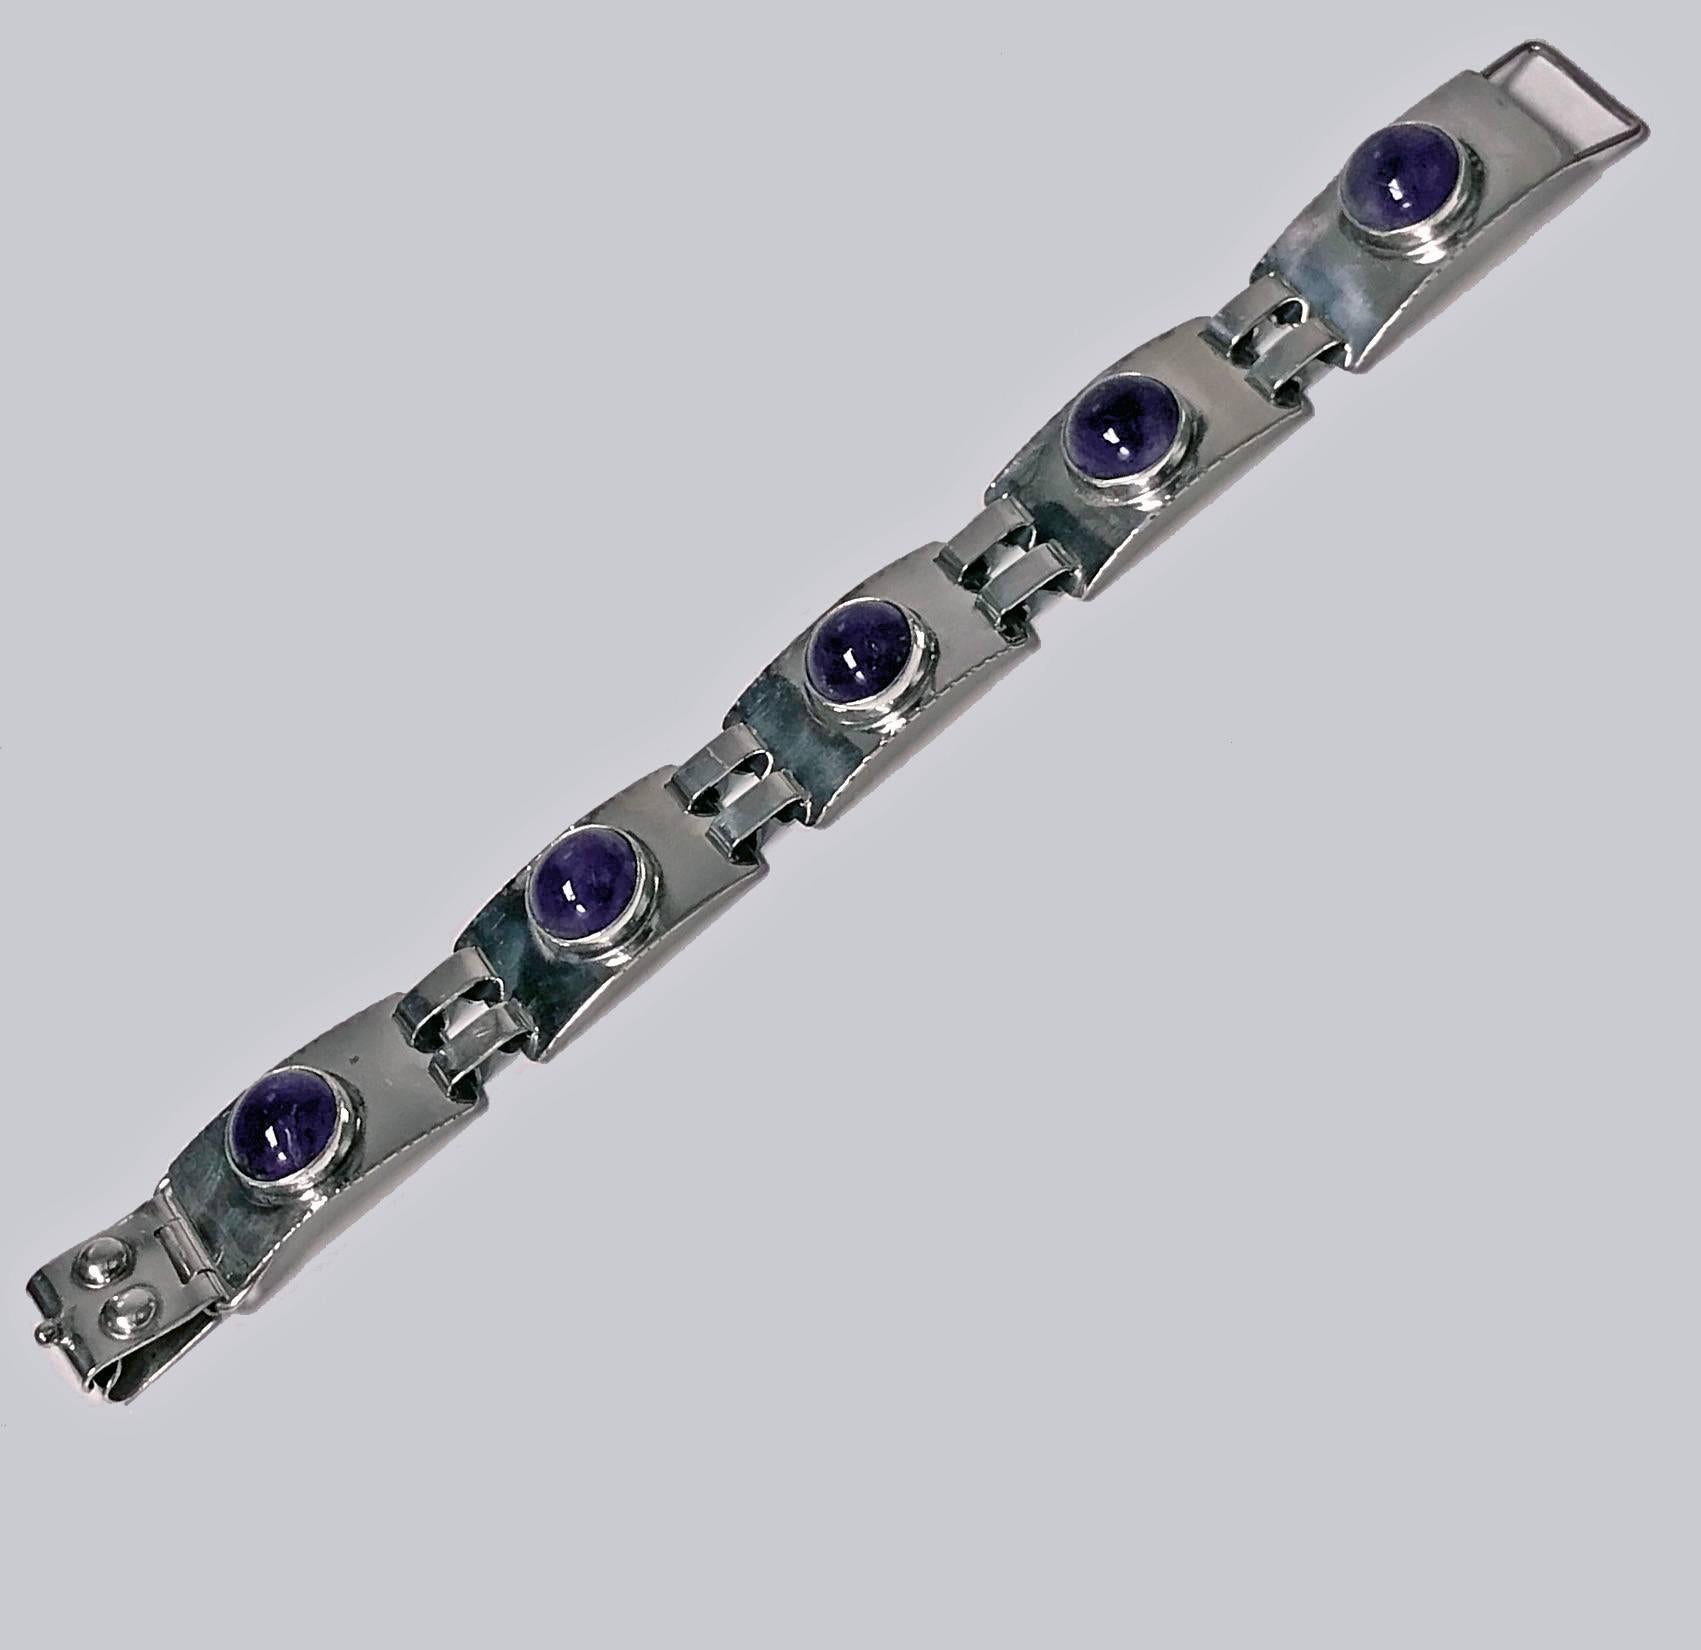 Arts and Crafts George Kramer Amethyst and Silver Bracelet, Germany C.1920. Georg Kramer was founded in 1771 and continued for four generations until 1932, thereafter continued by Walter Kramer. In 1890, the hallmark "GK" was introduced in